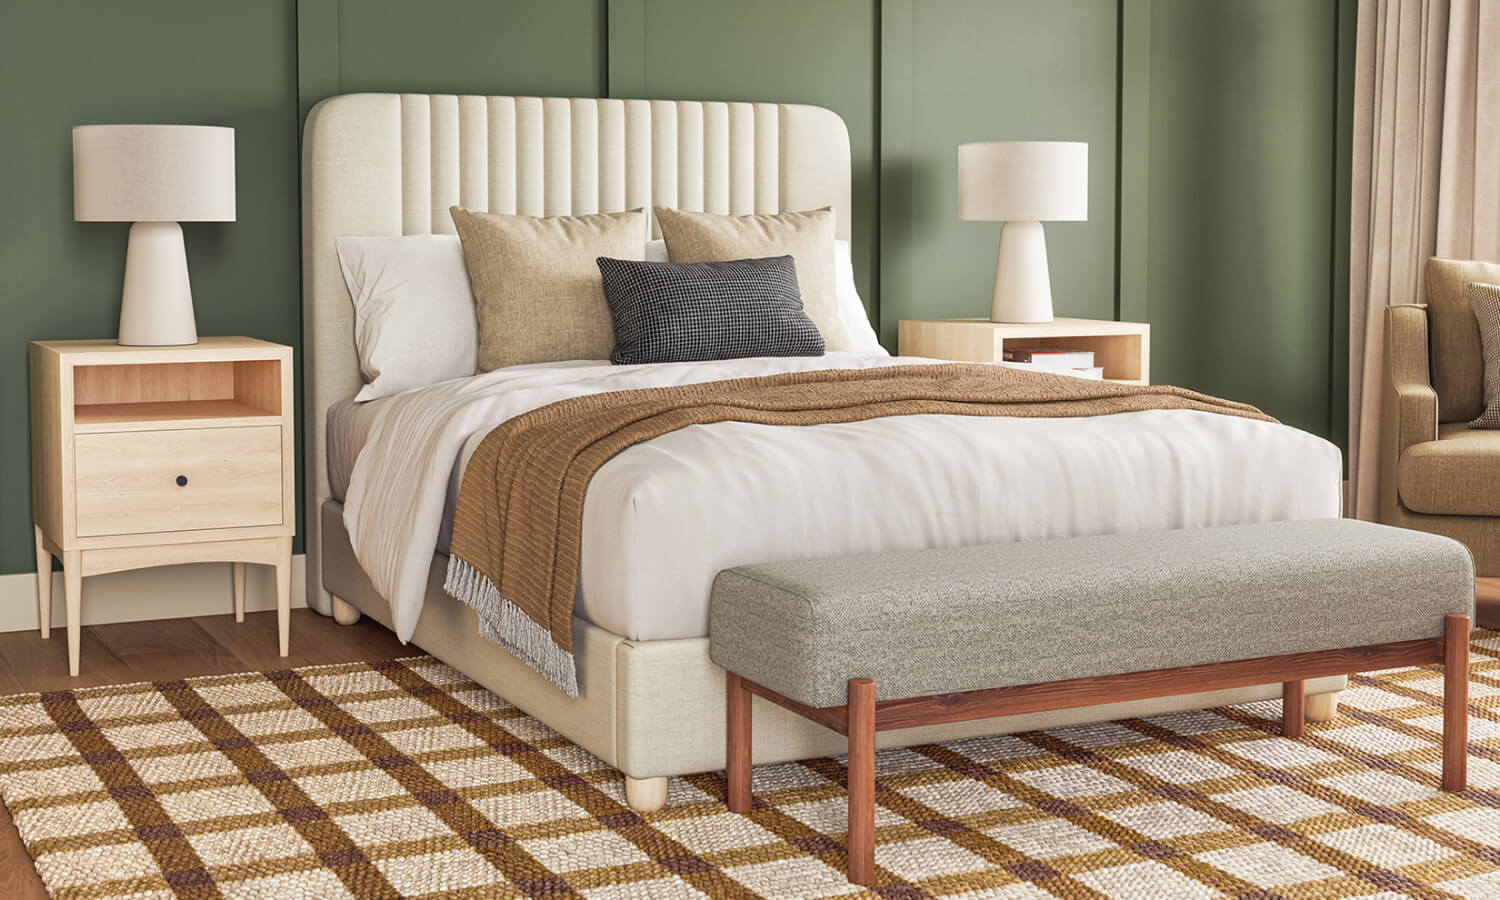 G: Atten Nighstand in maple with Pippen Bed in Deluxe Nougat fabric and Paloma Bench in Melton Feather fabric